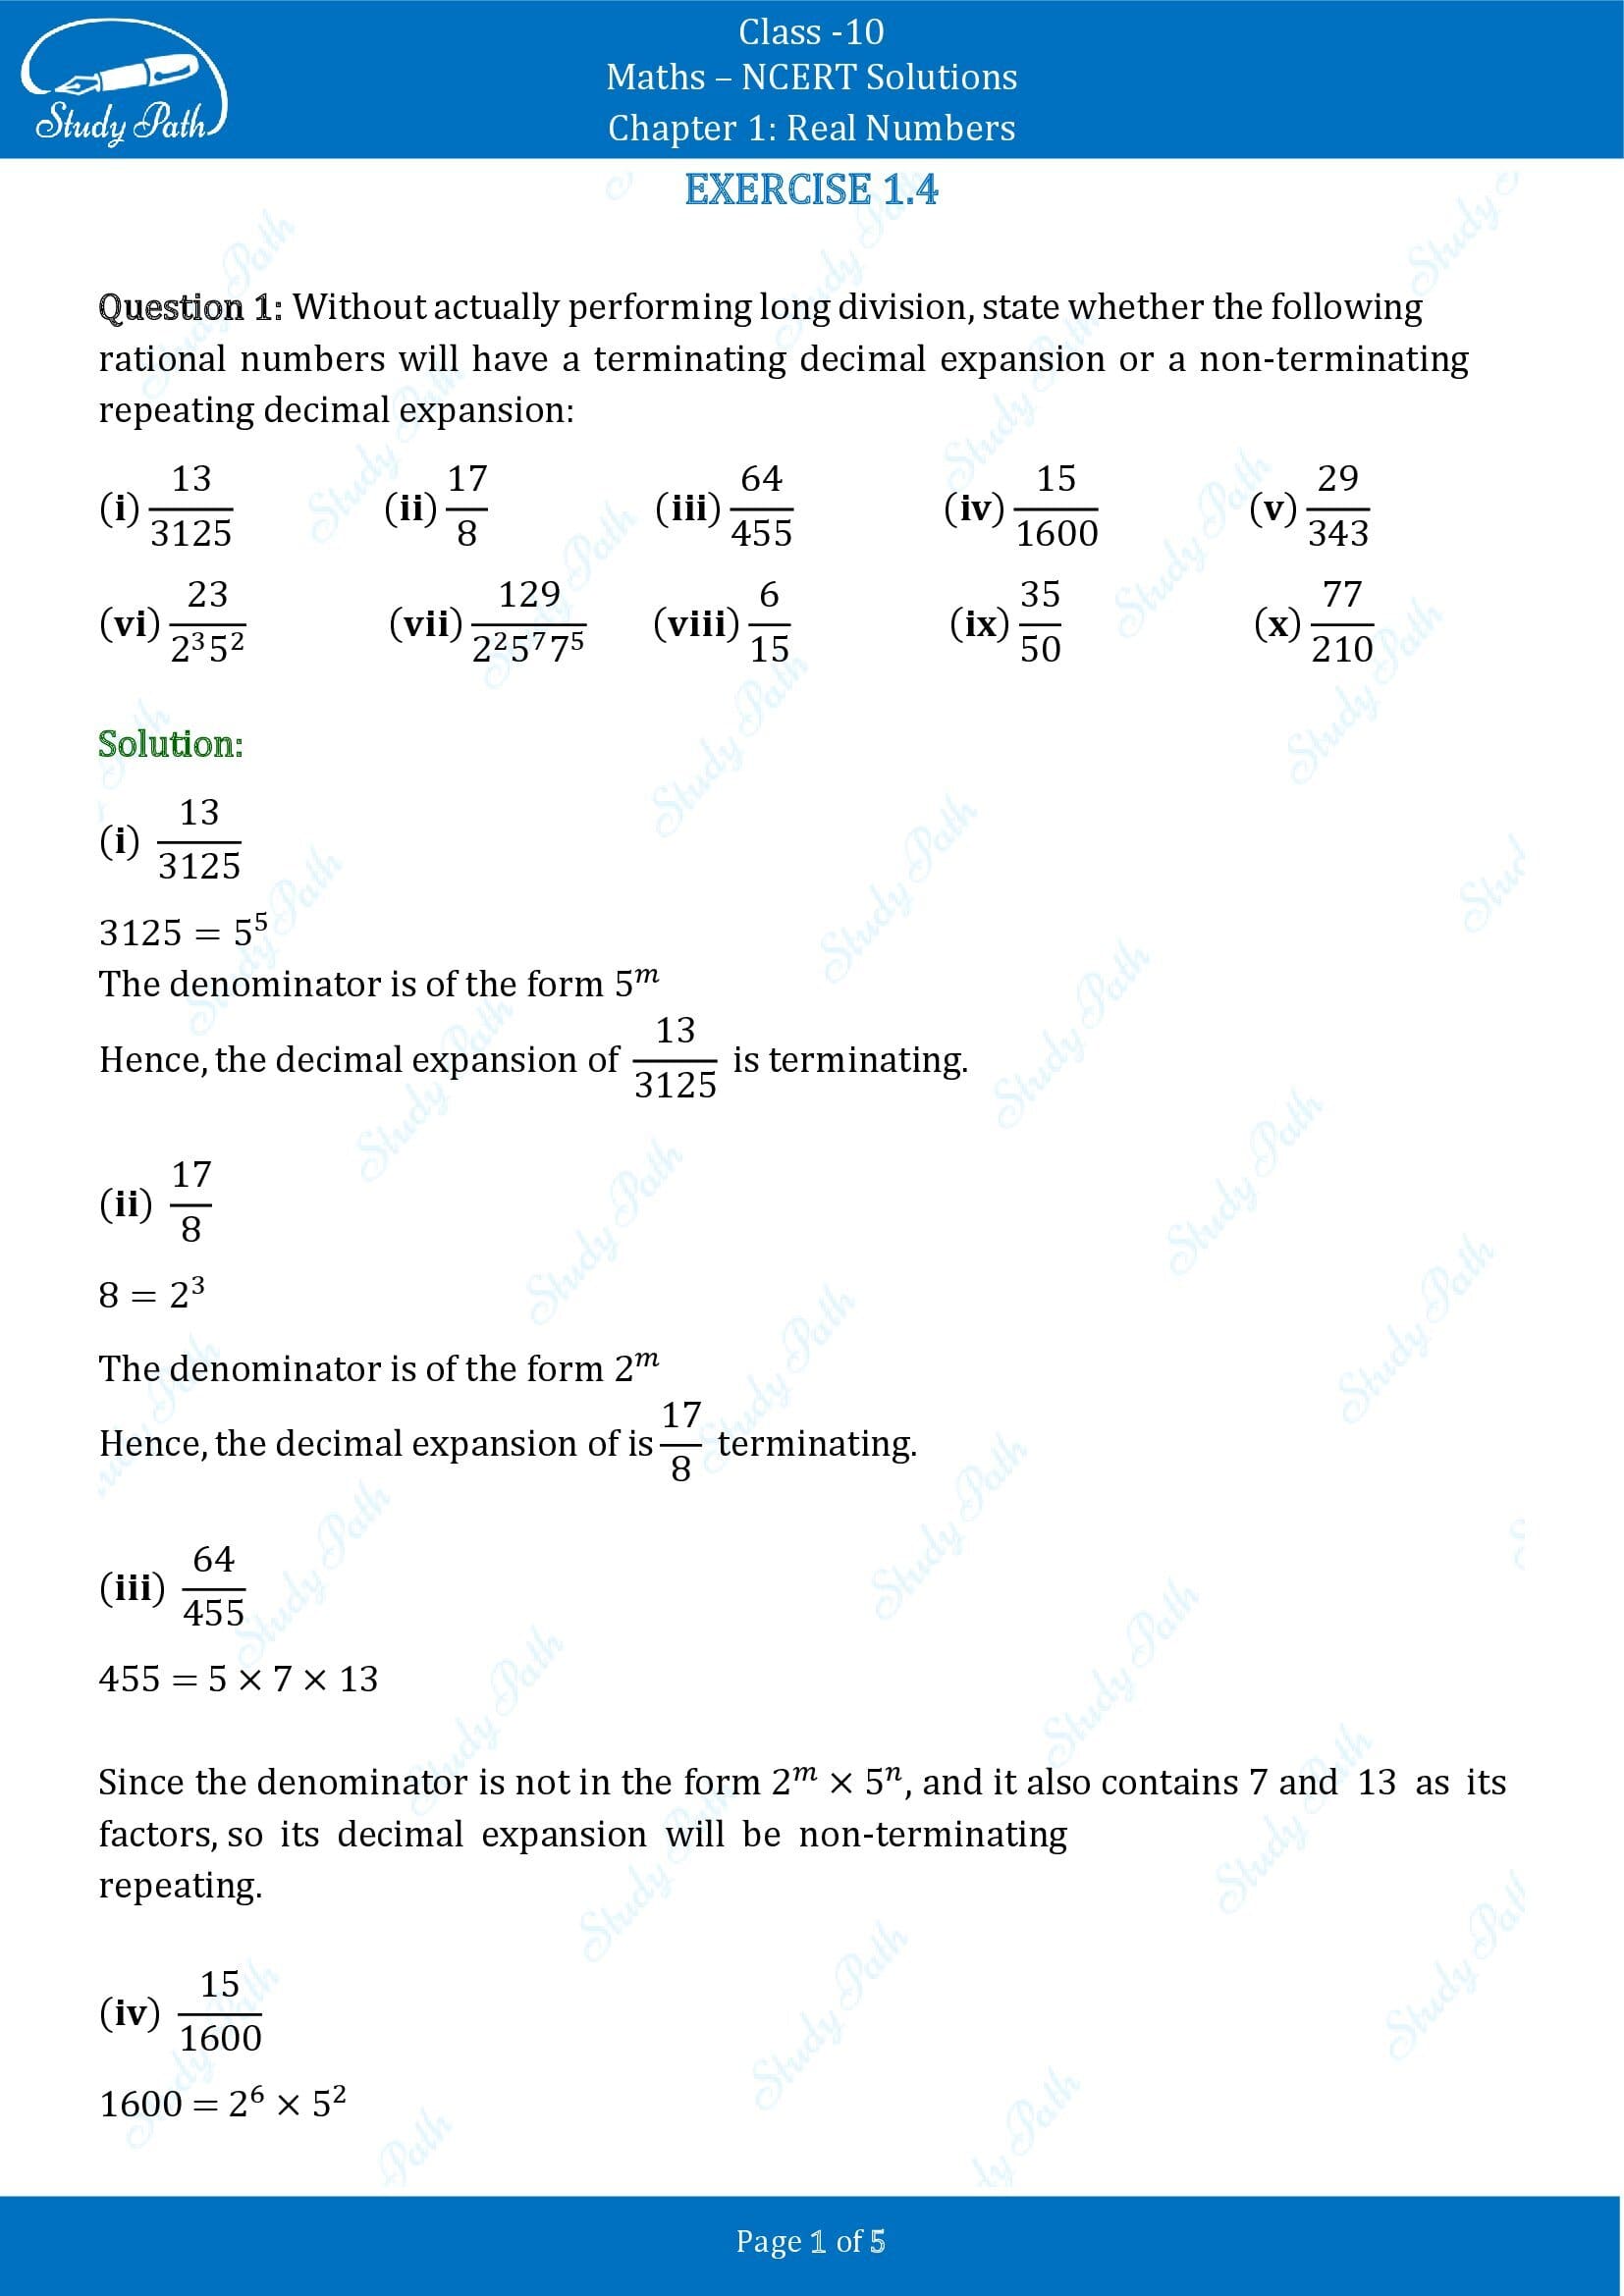 NCERT Solutions for Class 10 Maths Chapter 1 Real Numbers Exercise 1.4 00001